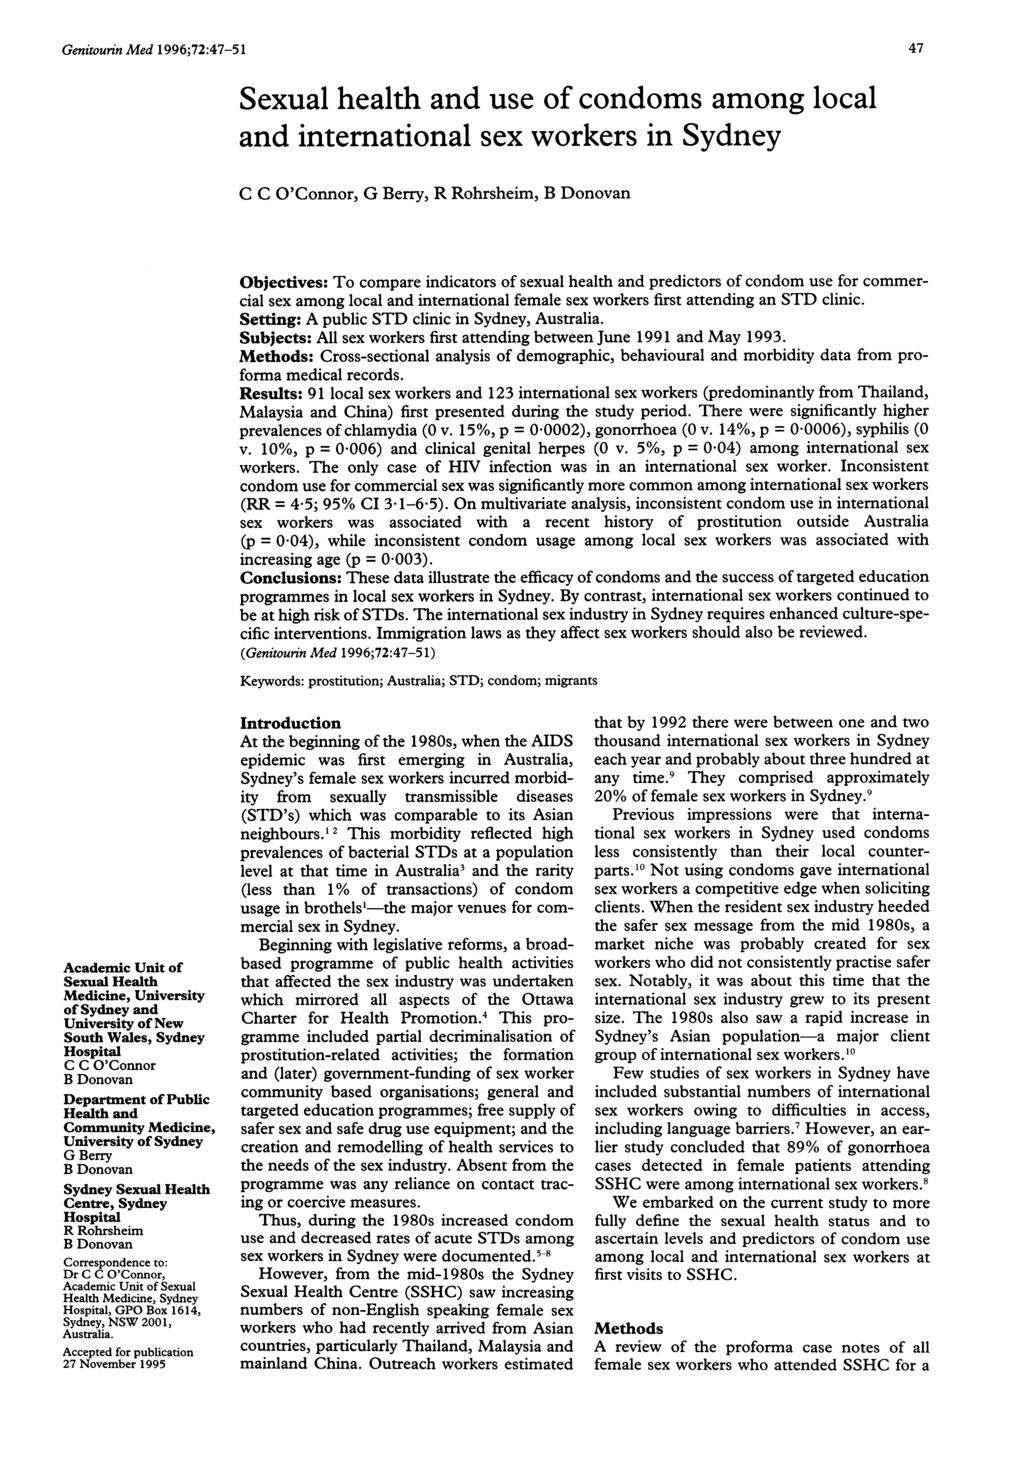 Genitourin Med 1996;72:47-51 Sexual health and use of condoms among local and international sex workers in Sydney 47 Academic Unit of Sexual Health Medicine, University of Sydney and University of